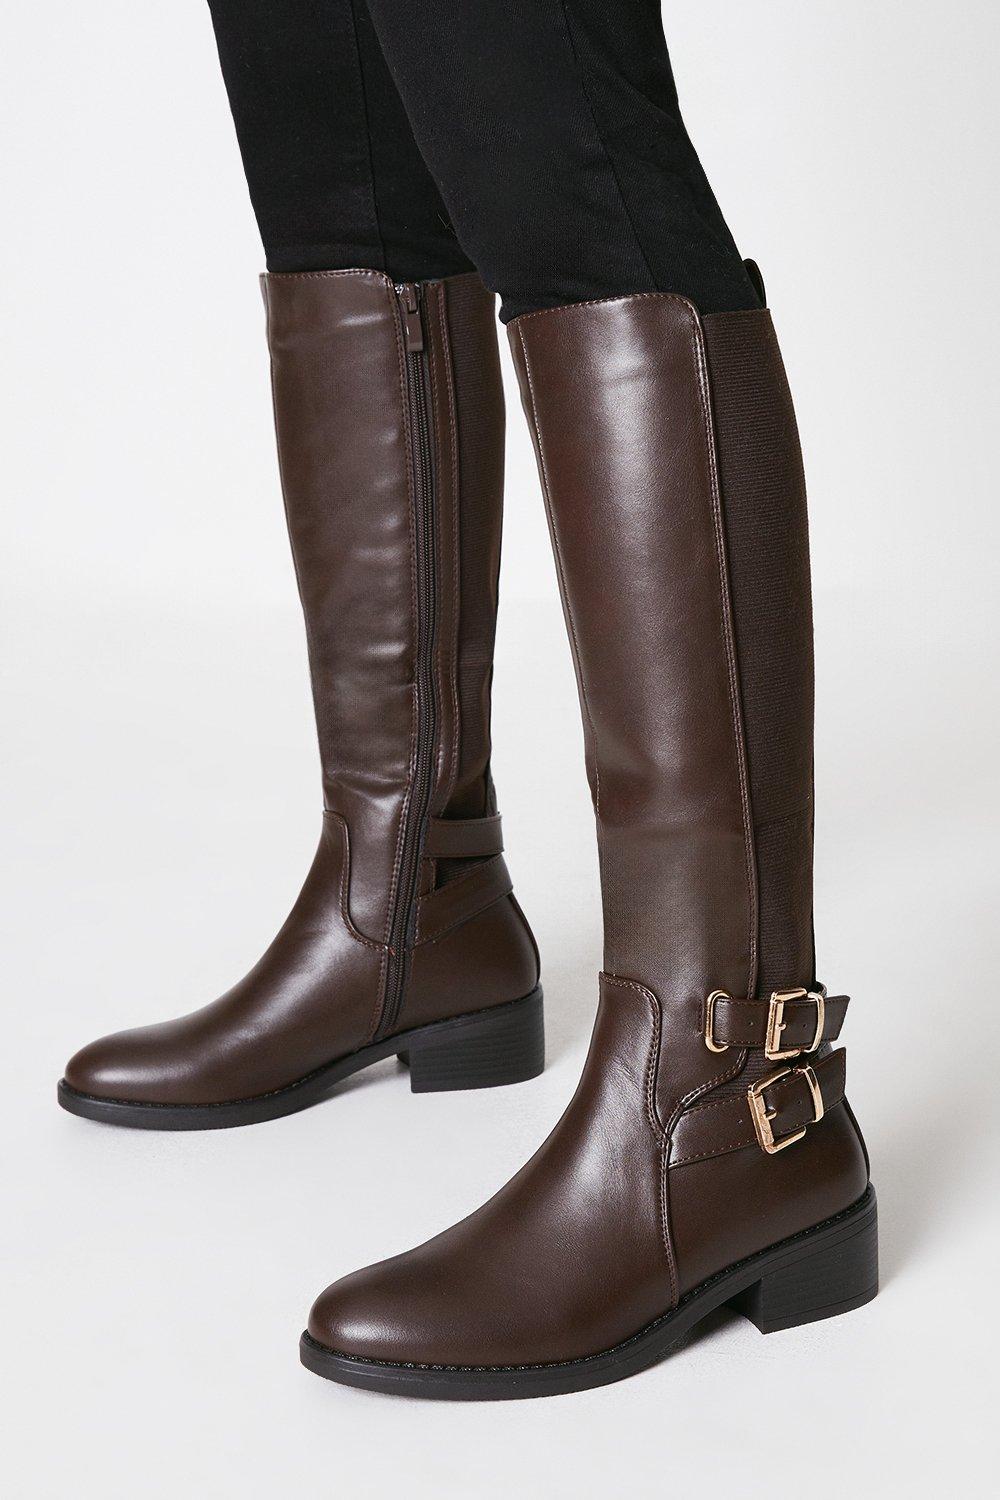 Women's Konnie Knee High Double Buckle Boots - chocolate - 7